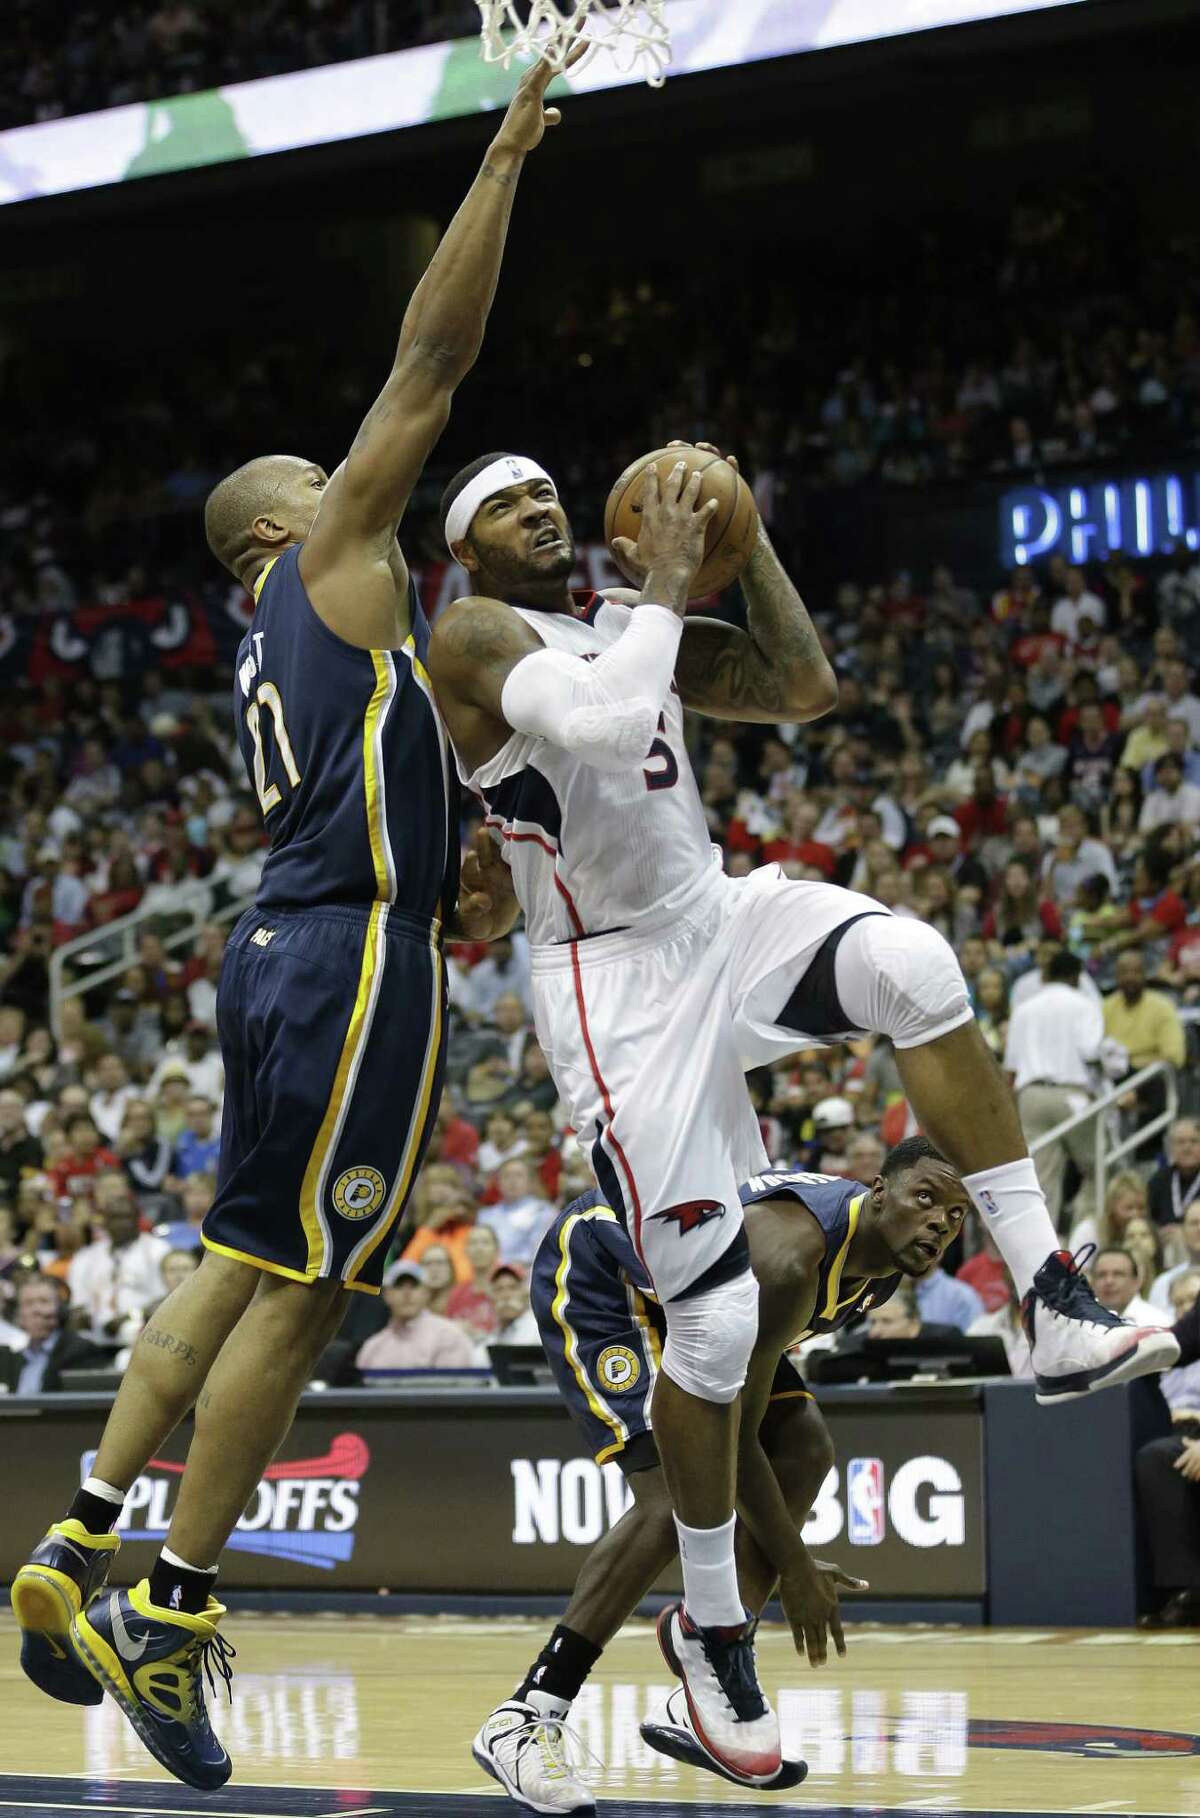 Atlanta's Josh Smith heads to the basket against Indiana's David West. Smith's career playoff high 29 points helped boost the Hawks into a 2-2 series tie.